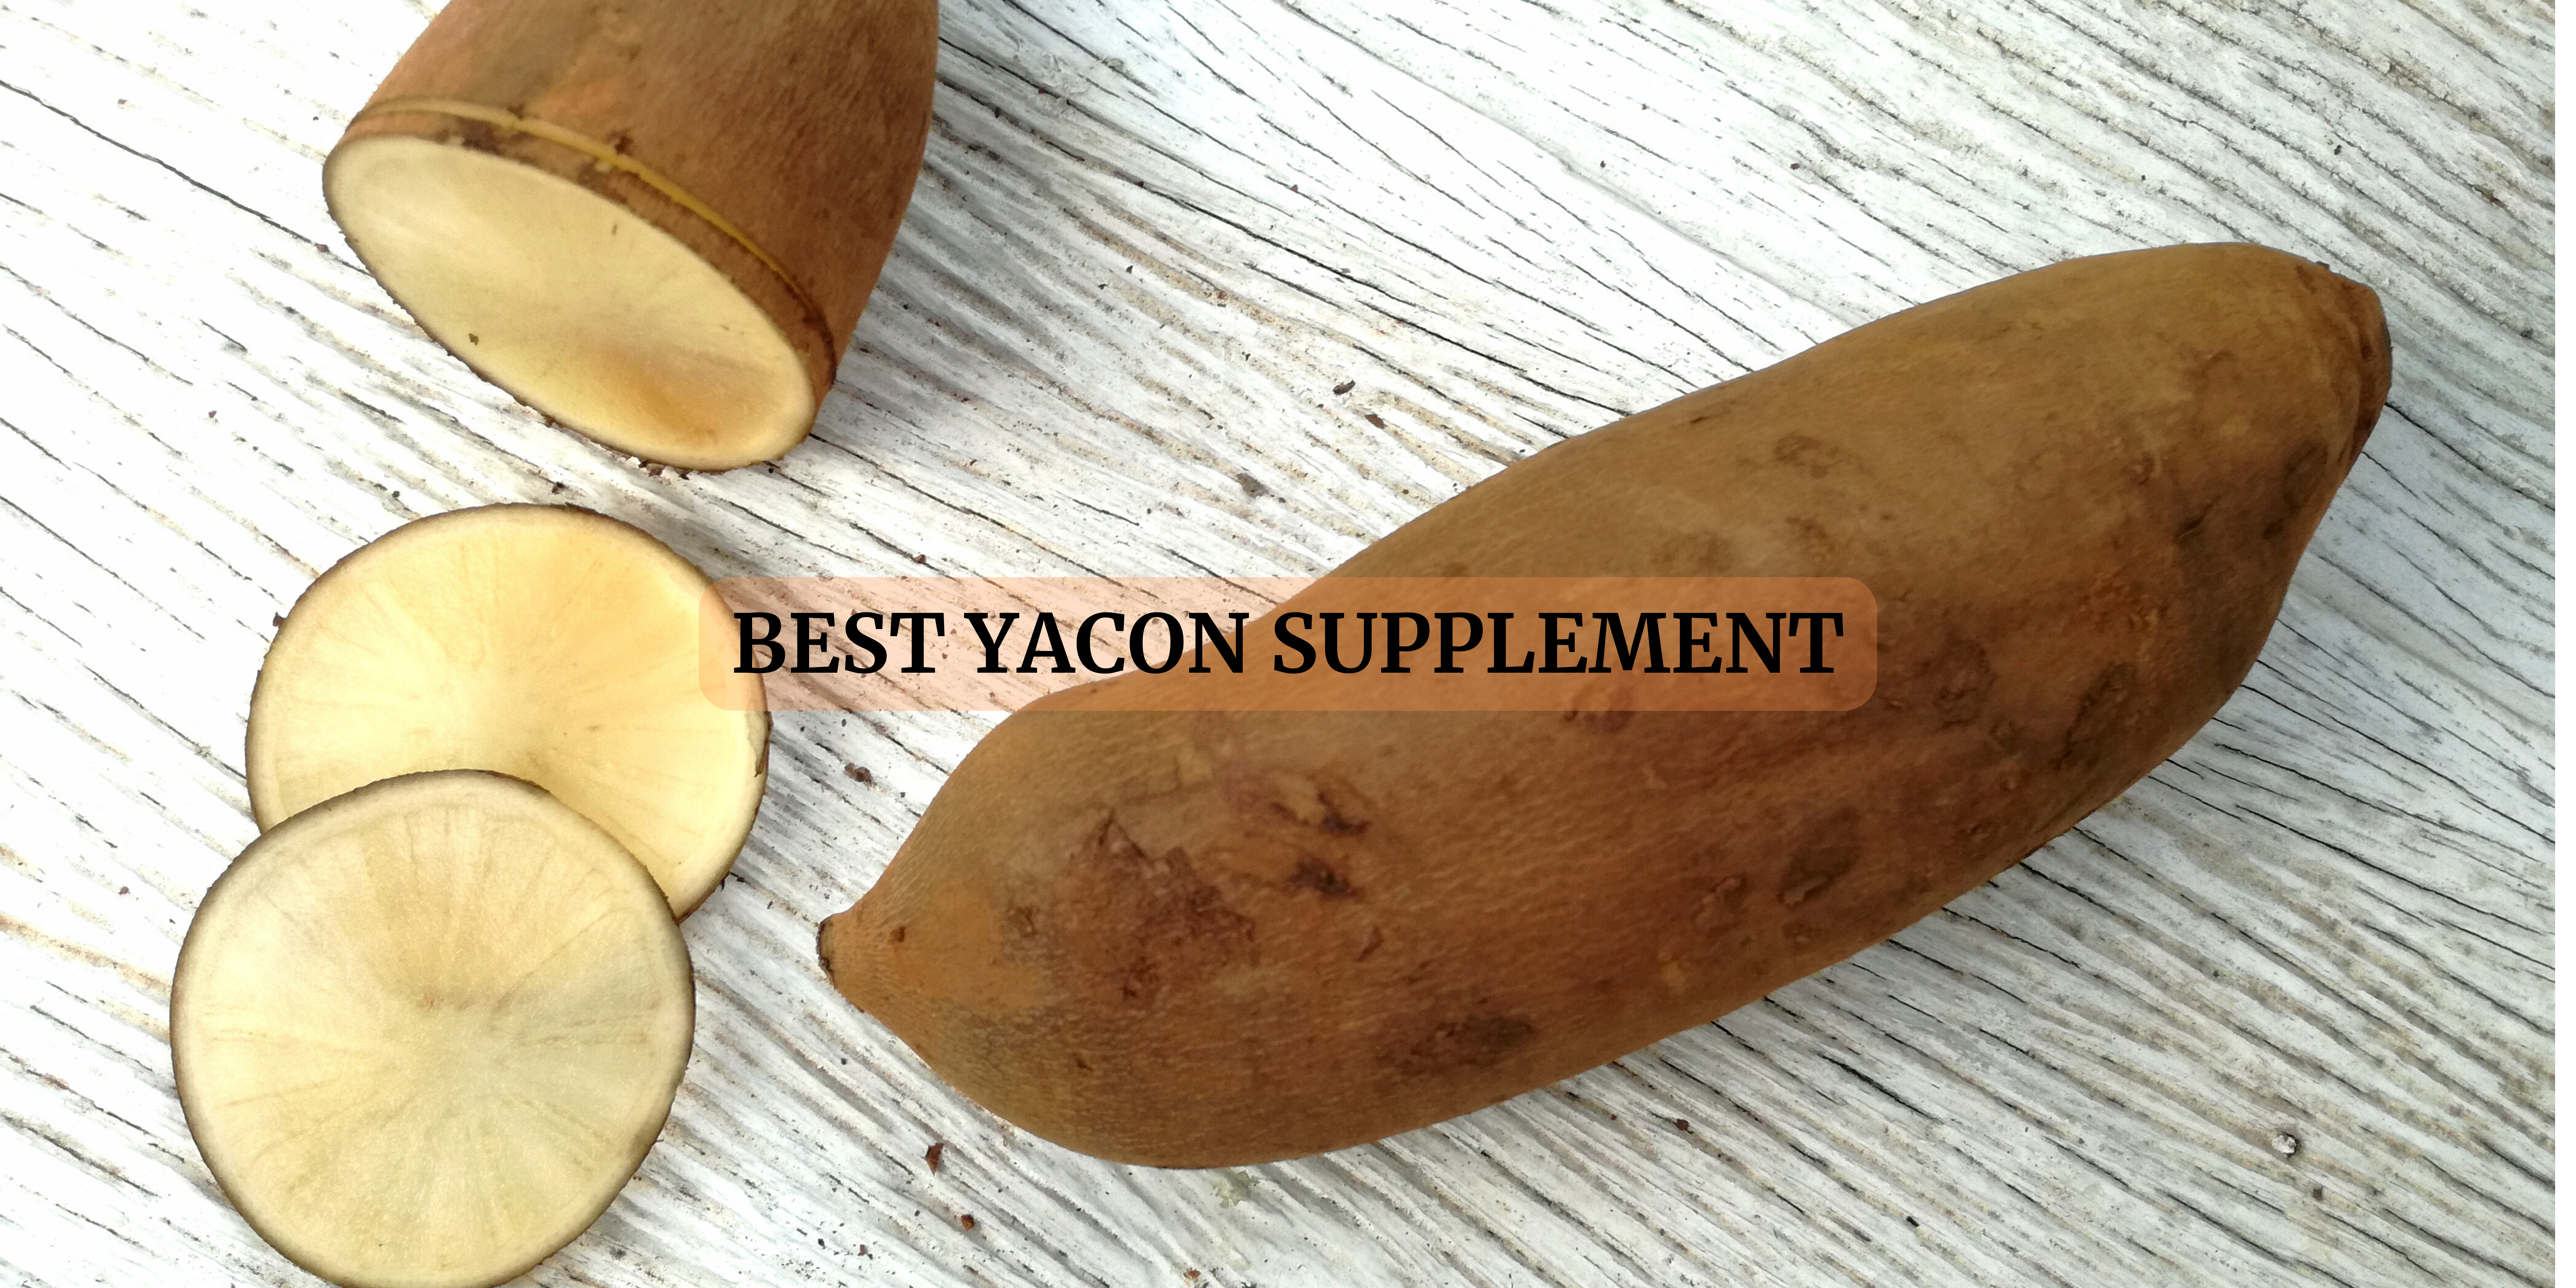 Yacon Supplements in France